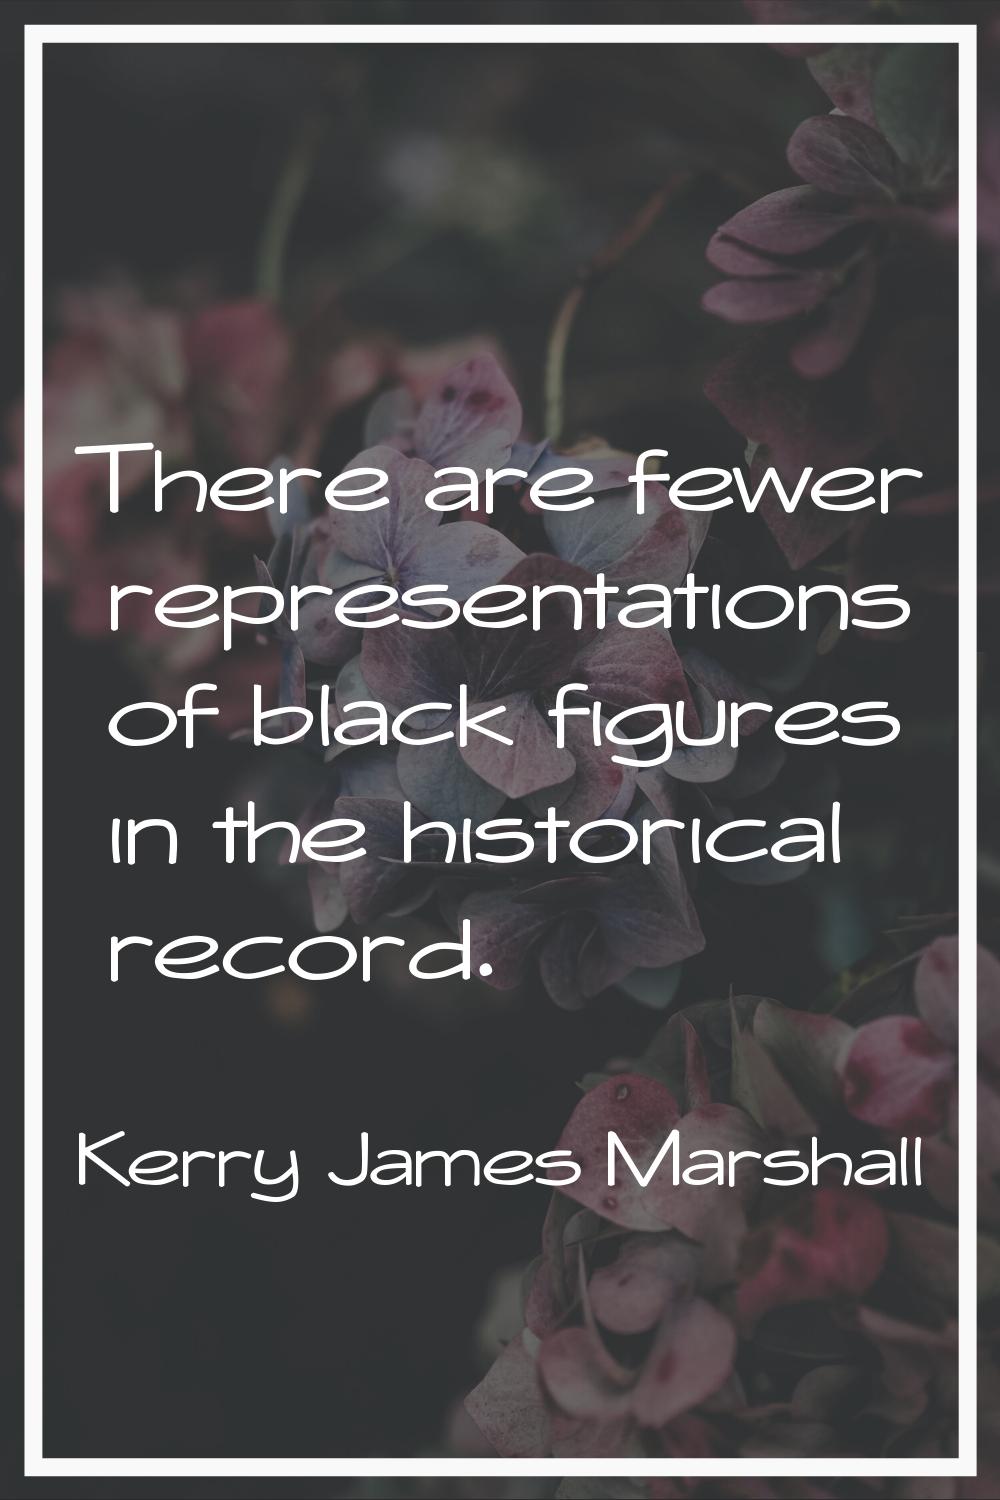 There are fewer representations of black figures in the historical record.